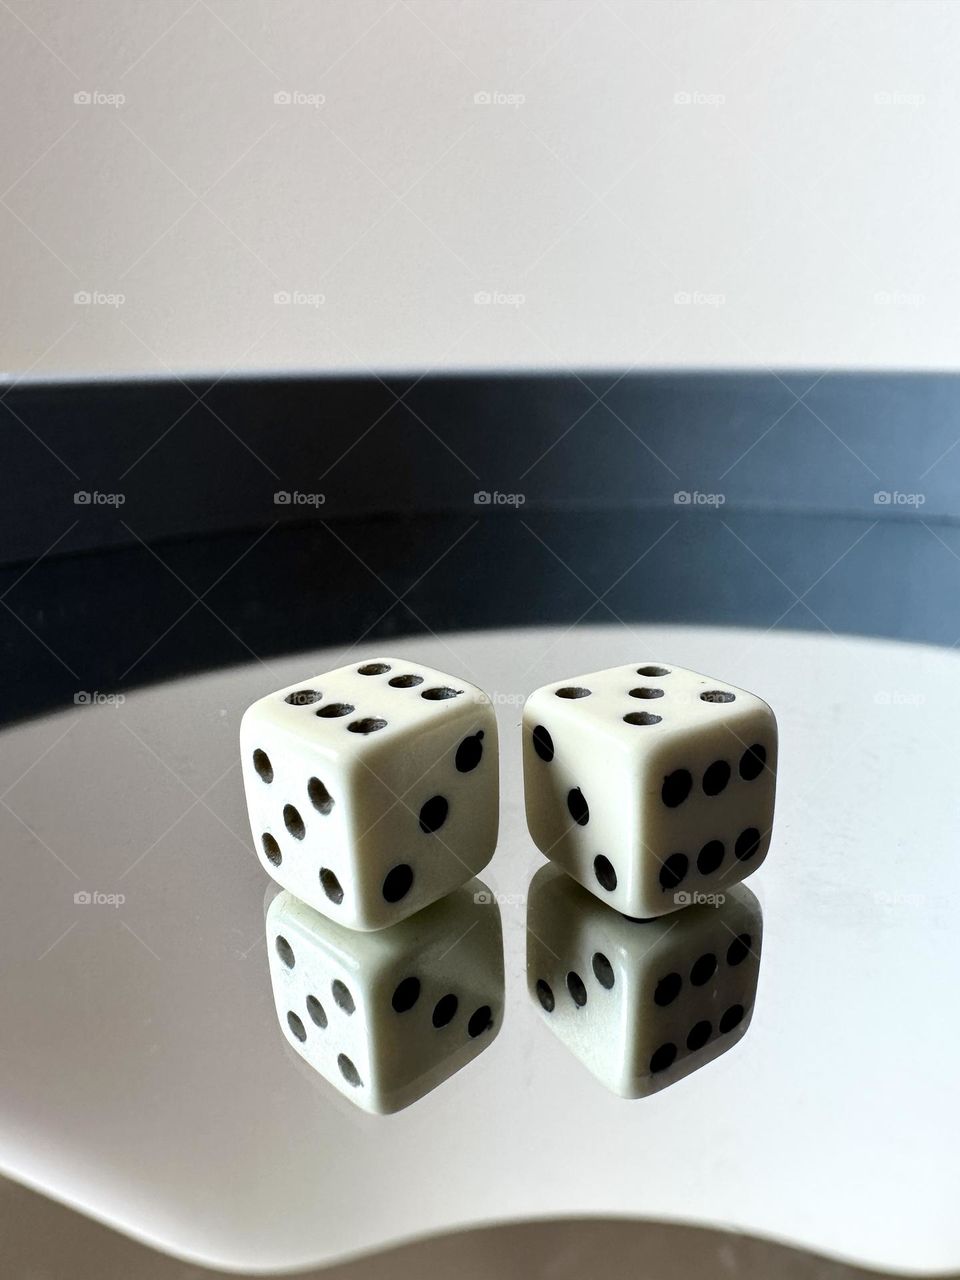 Dots on dice 